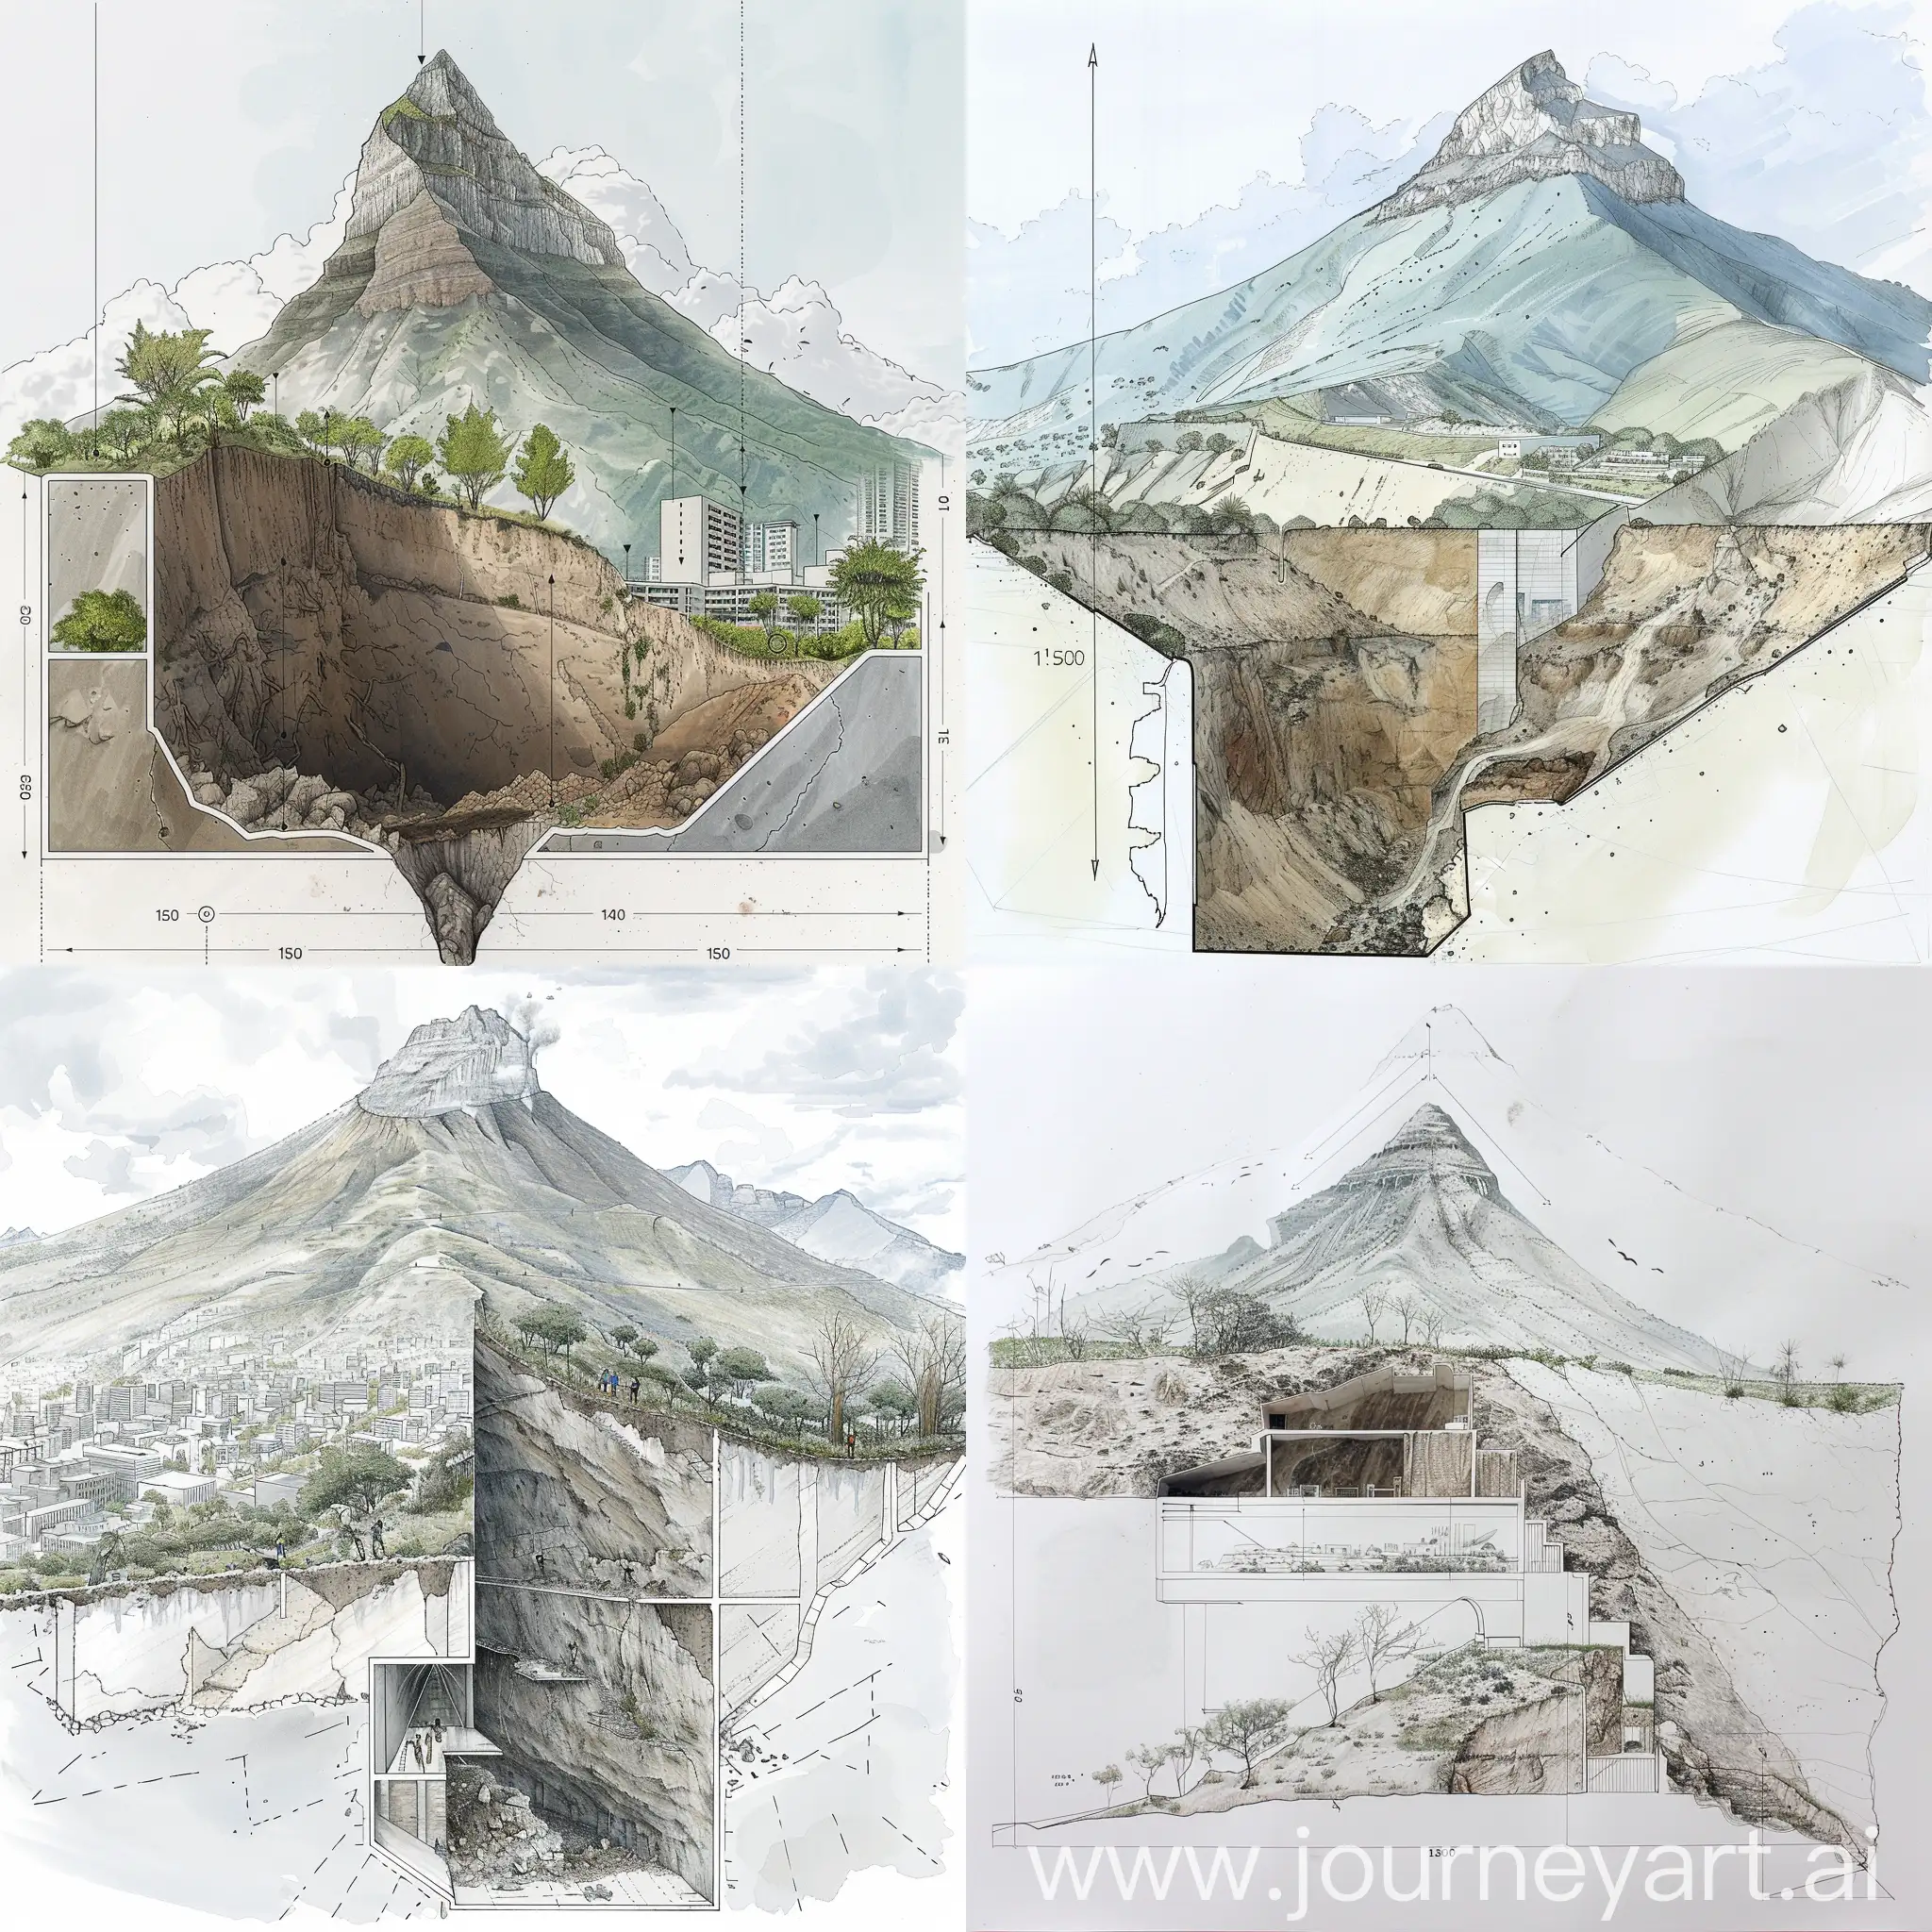 Draw a section 1:500 imagining cerro de la silla, monterrey, mexico, to overcome a hurricane and erosion over 10 years, imagining that there are no interventions done, so the mountain will be destroyed for at least 20 meters